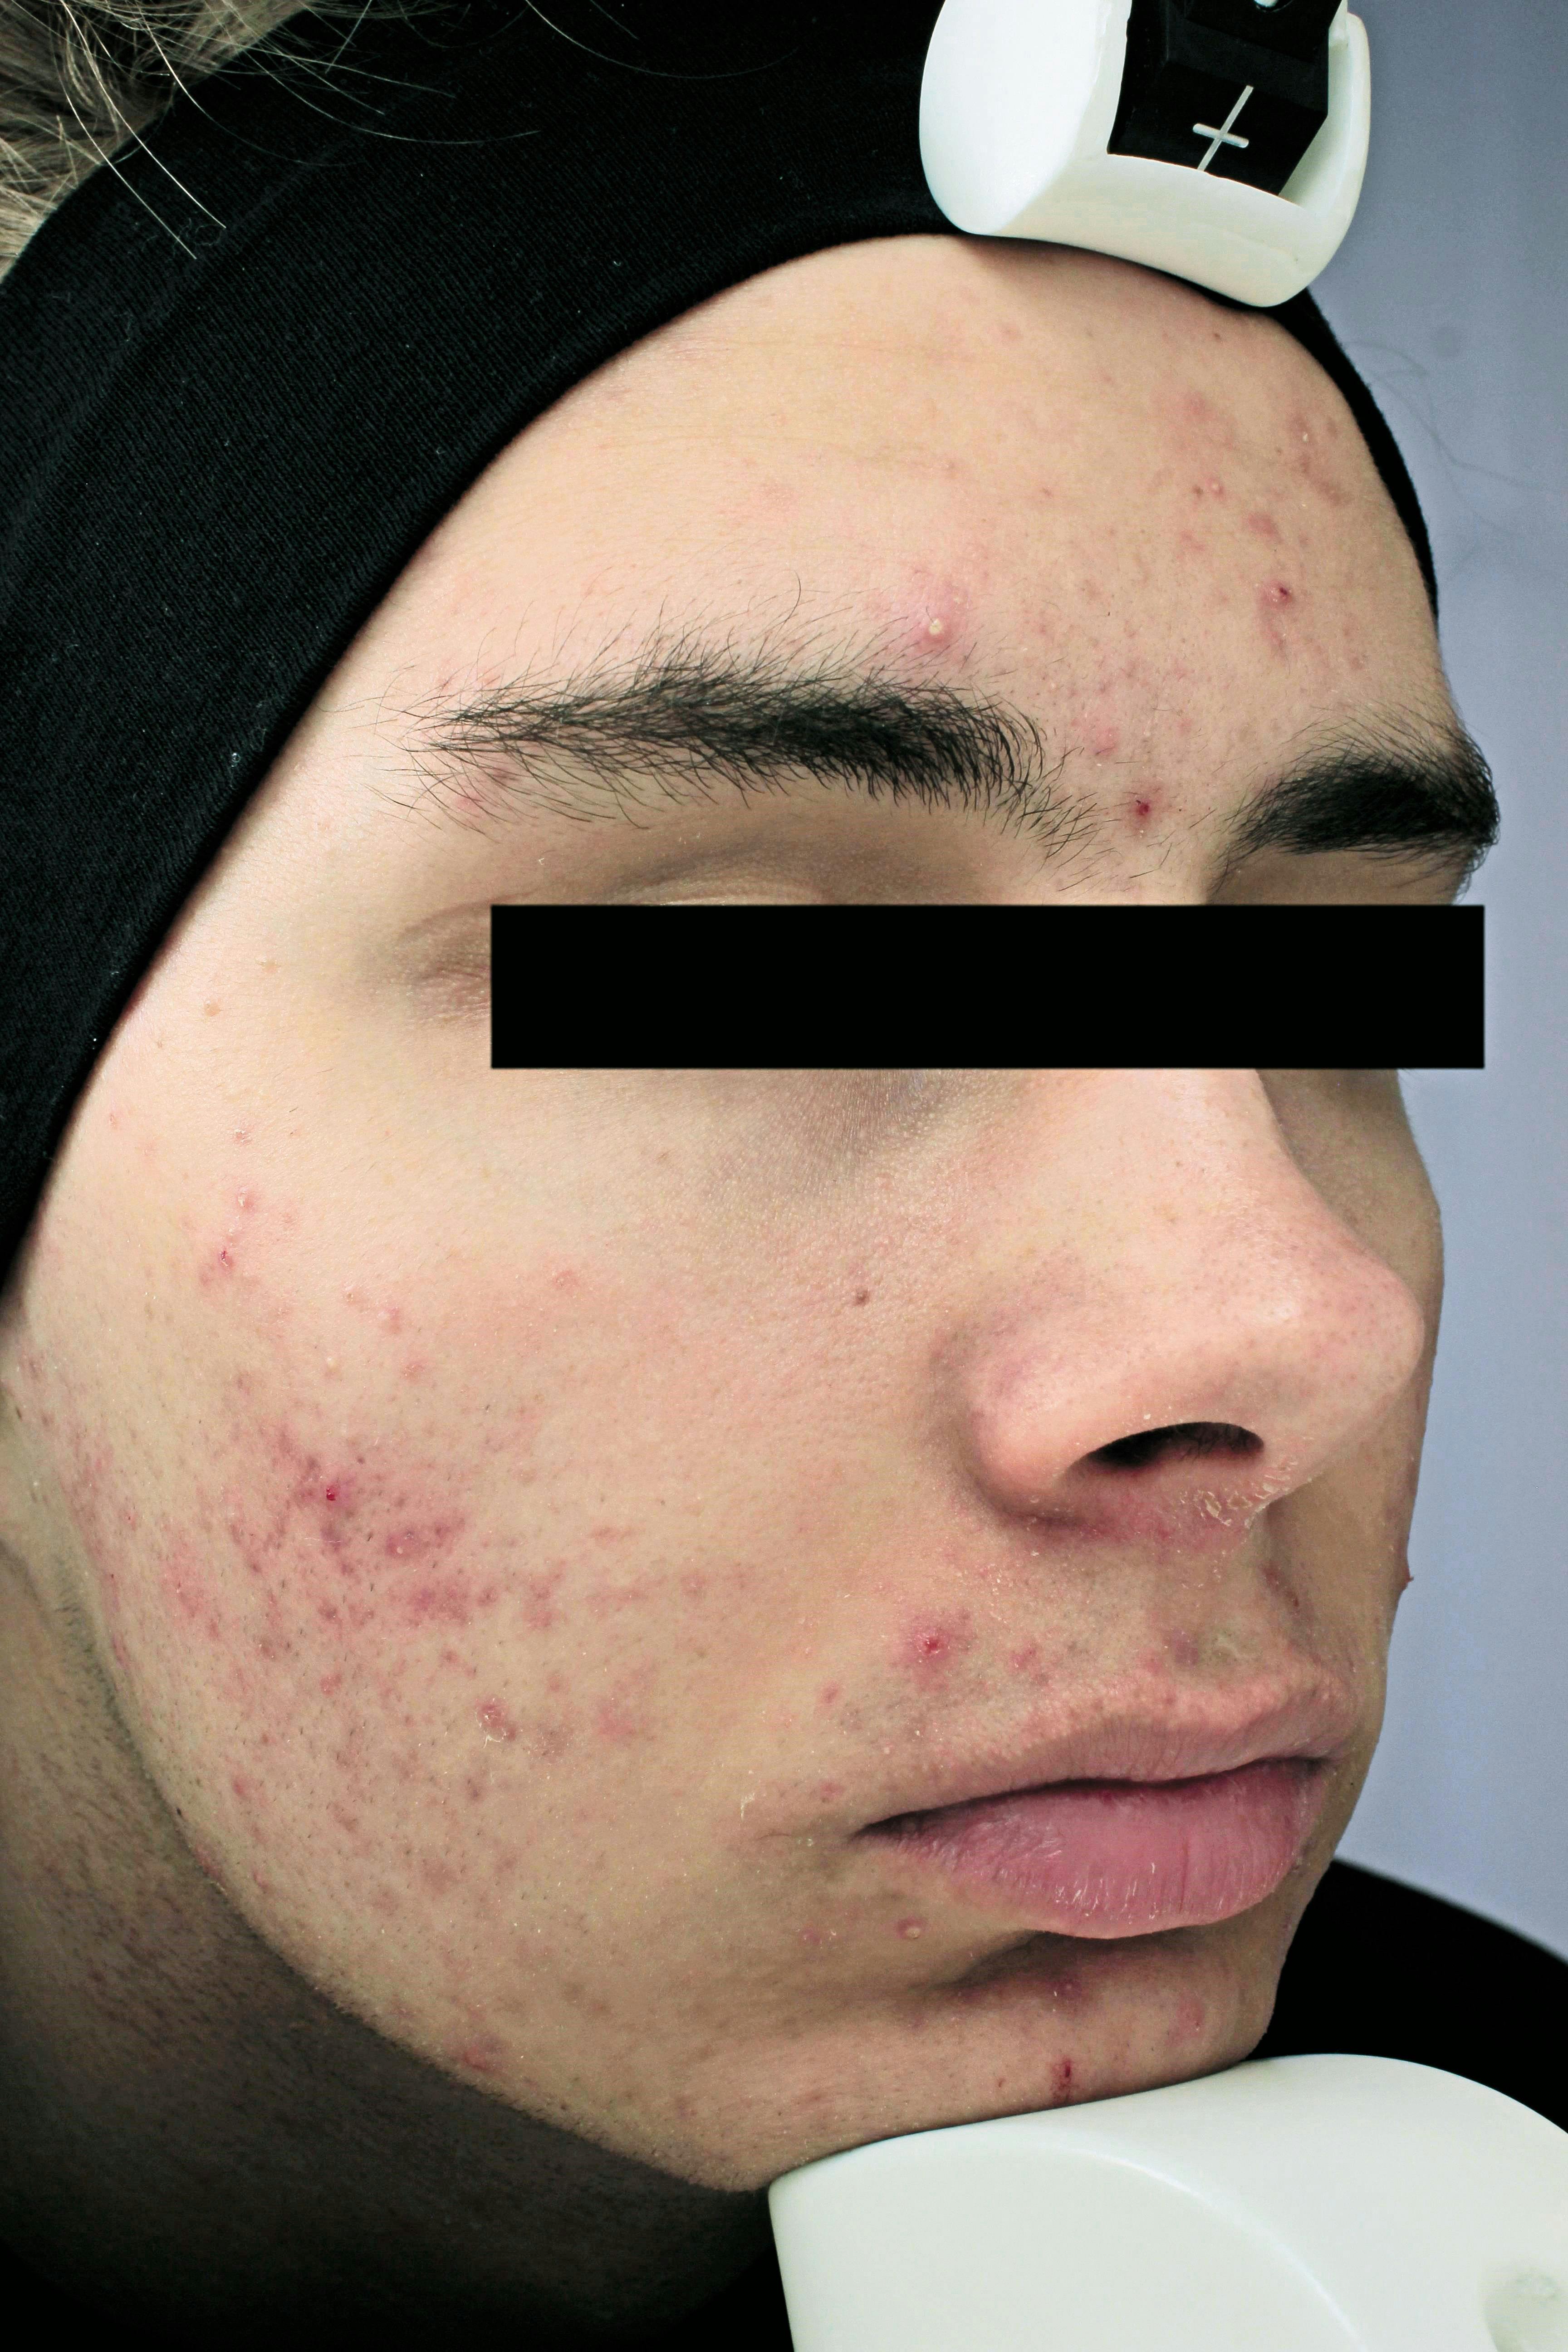 patient with acne